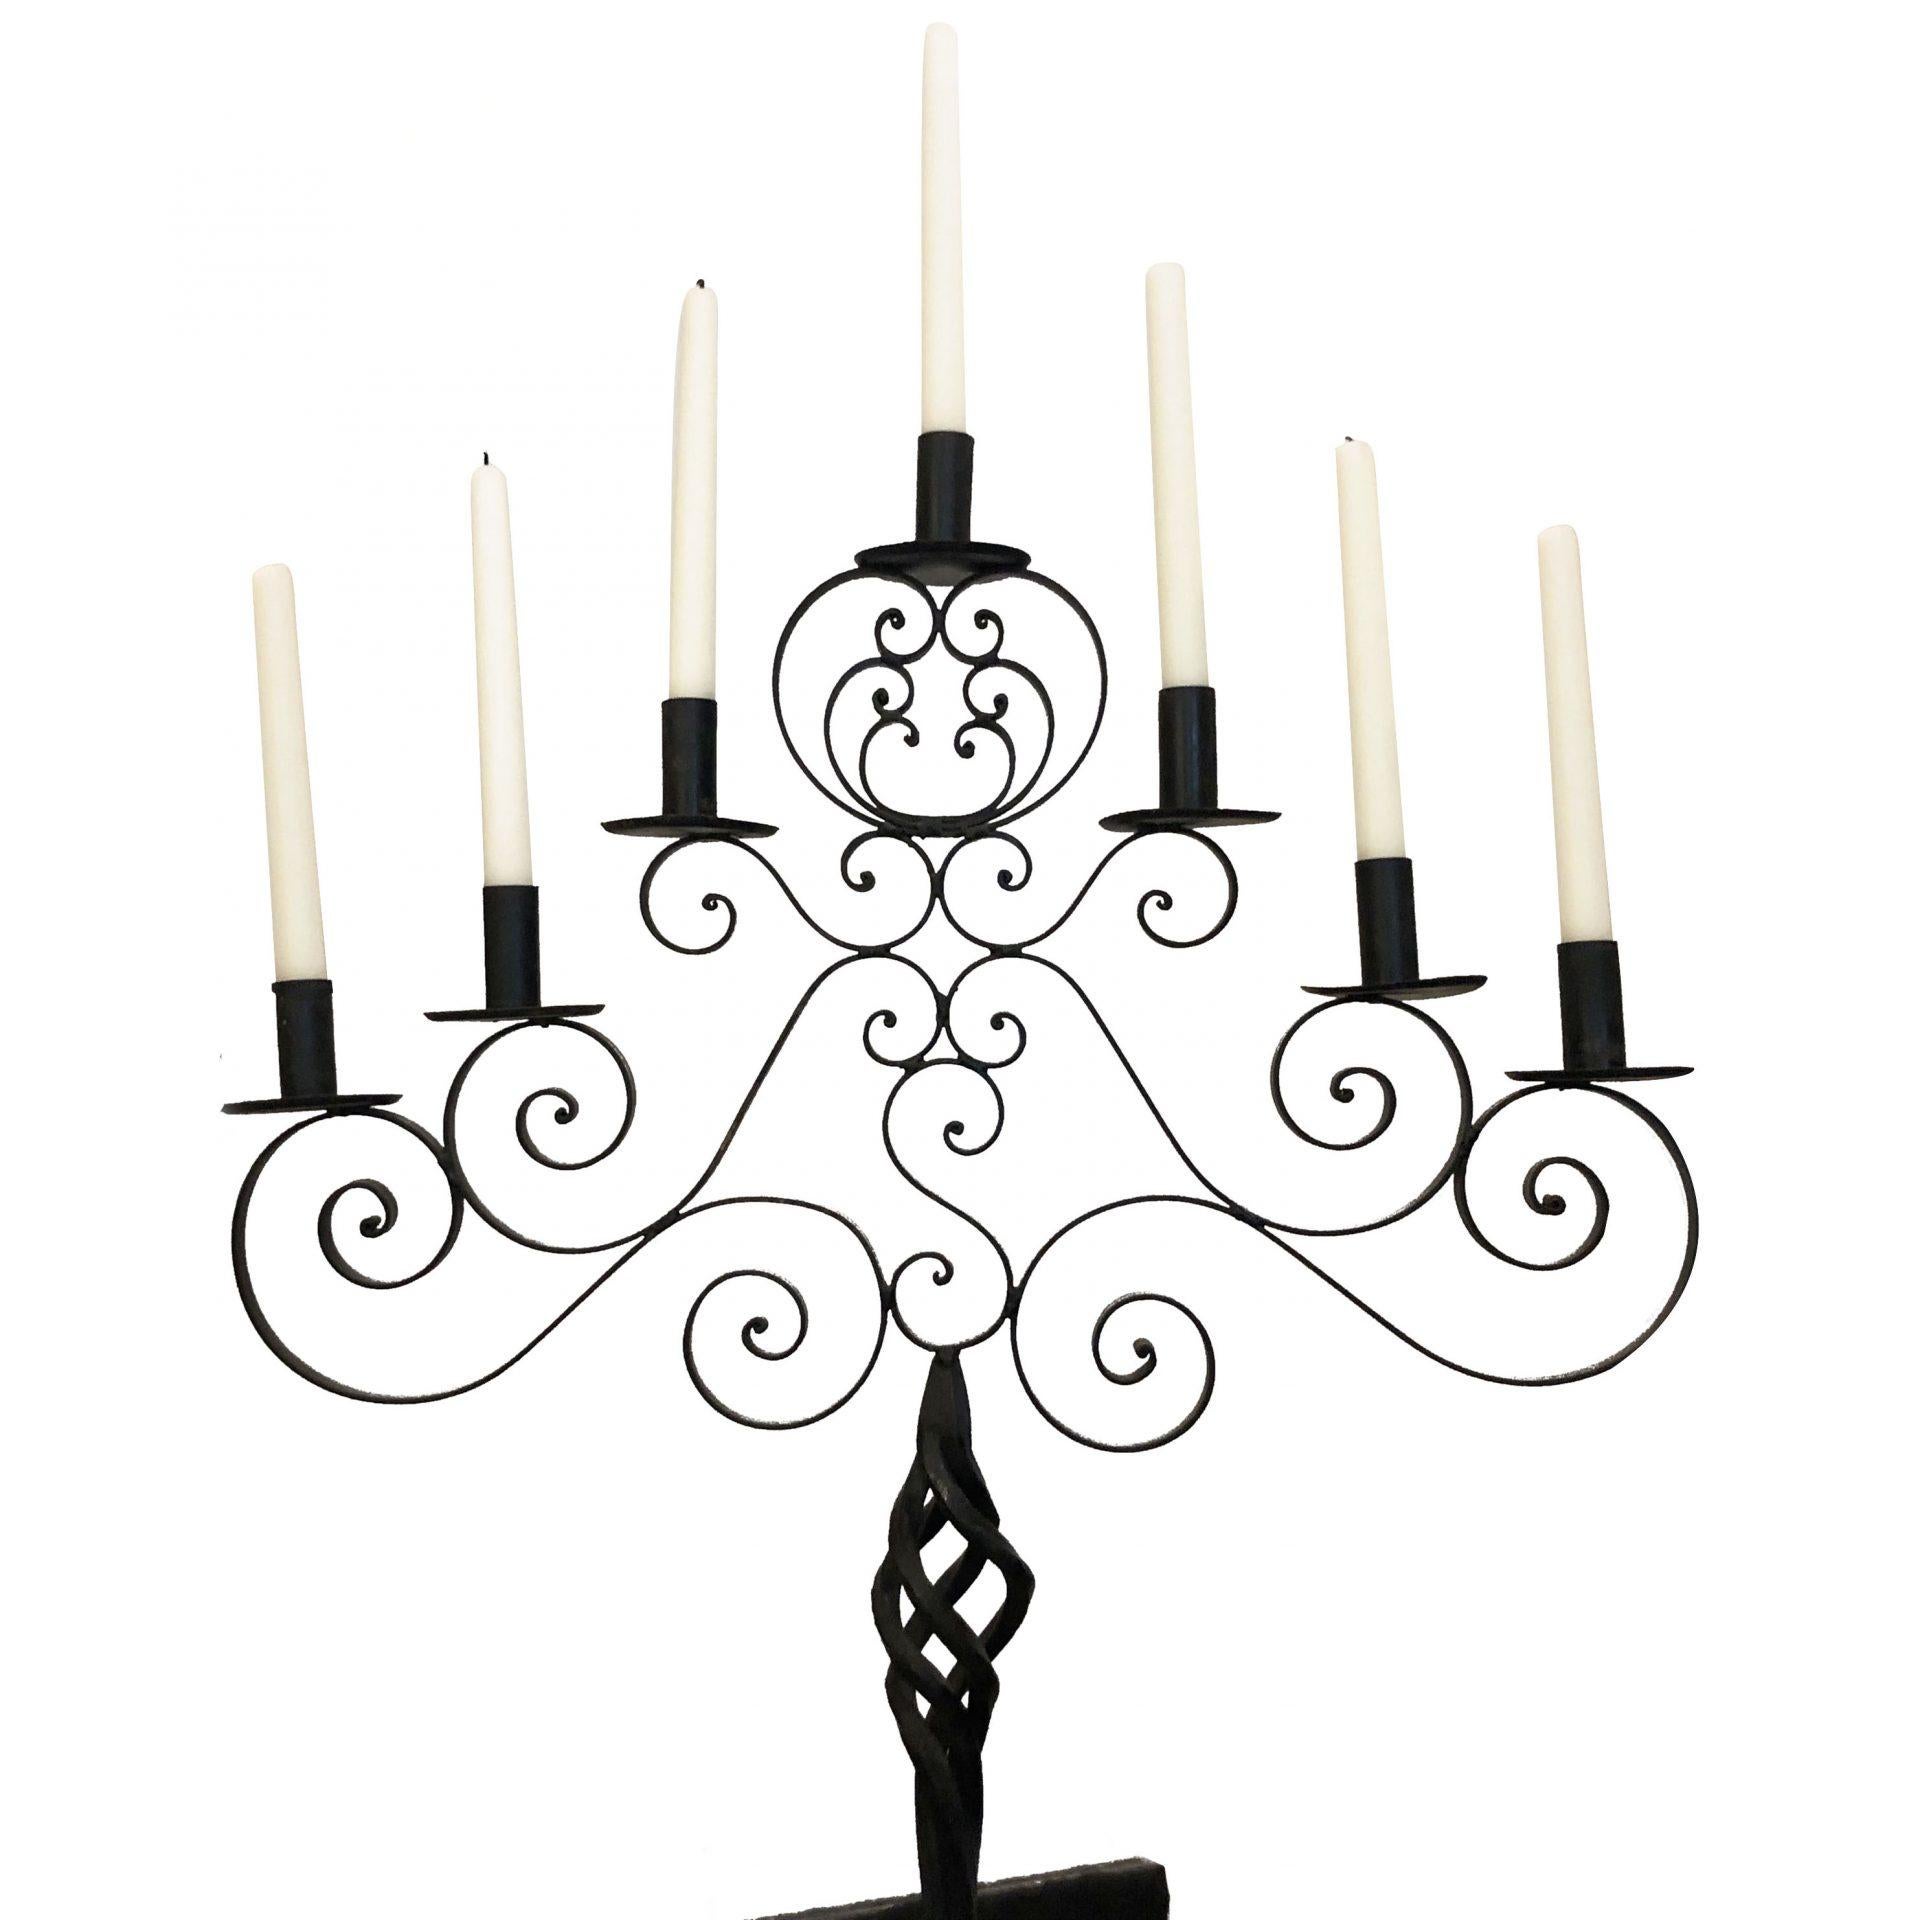 A black antique, late 19th century French floor candle holder, candelabra hand crafted in very ornate fer forge work with wrought iron scrolls and seven candle holders, in good condition. Wear consistent with age and use. circa 1890, France.